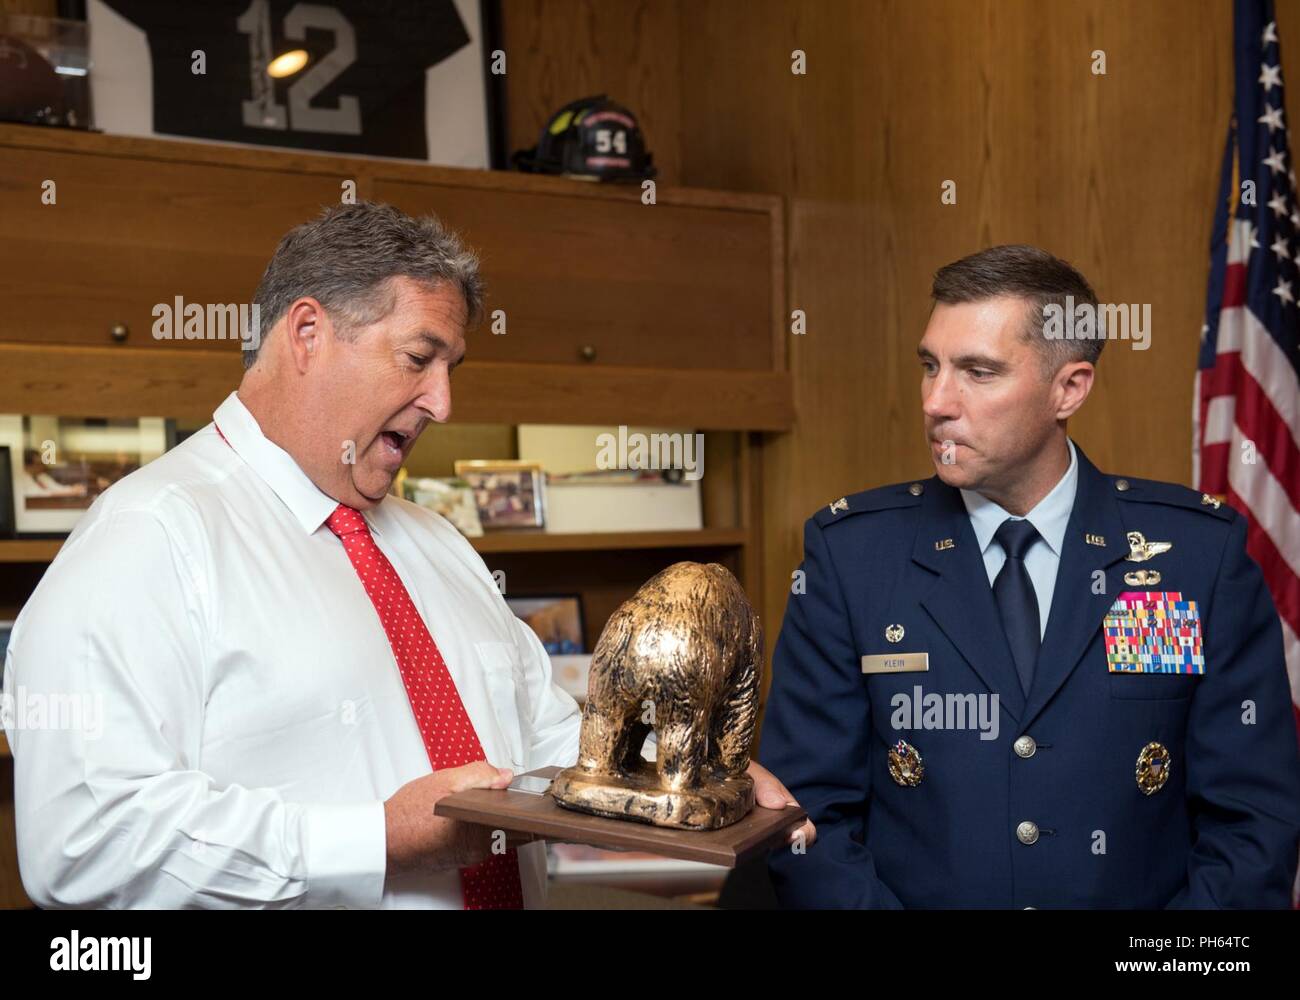 U.S. Air Force Col. John Klein, 60th Air Mobility Wing commander presents a Golden Bear to Assemblymember Jim Frazier, 11th District, during a presentation at the California State Capitol, Sacramento, June 25, 2018. Travis was honored by the California State Assembly with a Resolution honoring its 75th Anniversary. For the past 75 years, Travis AFB has been a focal point for the world as a power projection platform, a means to deliver hope, and a mission fueled by community support. Stock Photo